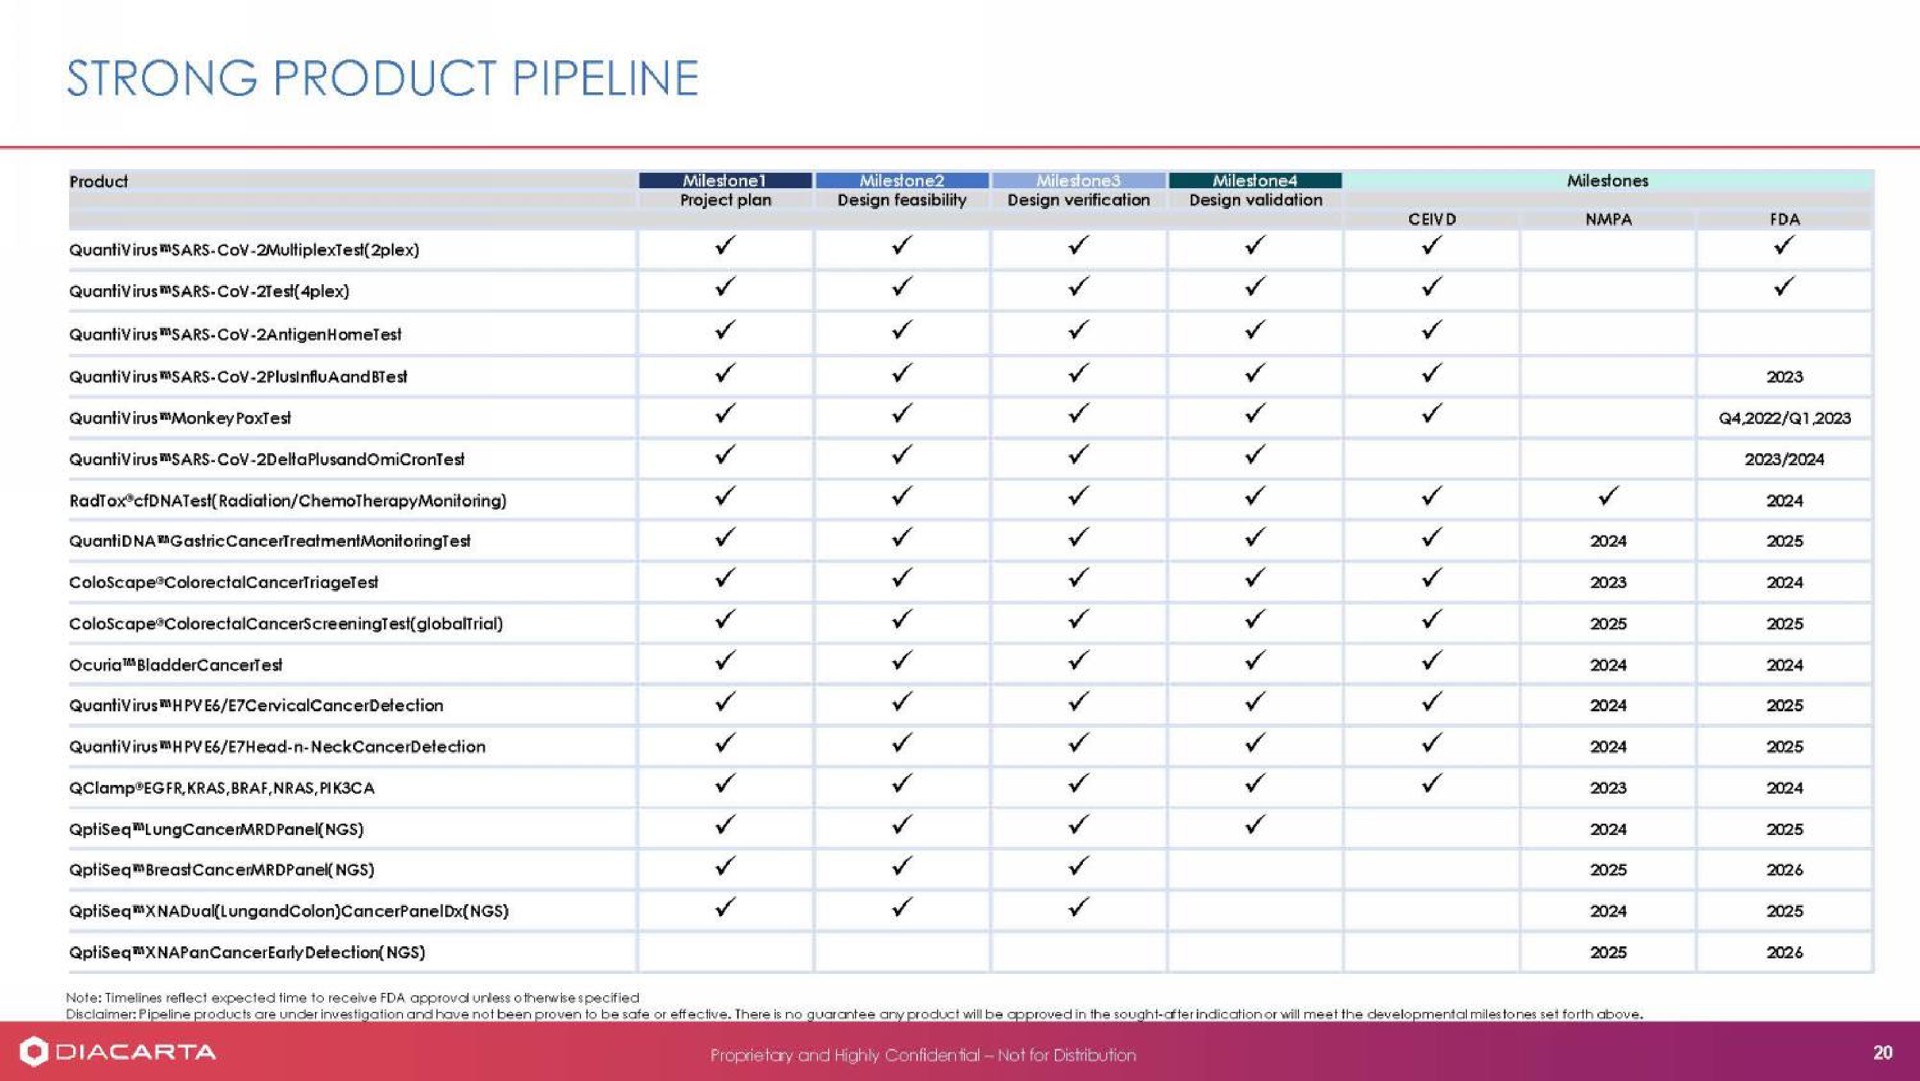 strong product pipeline | DiaCarta